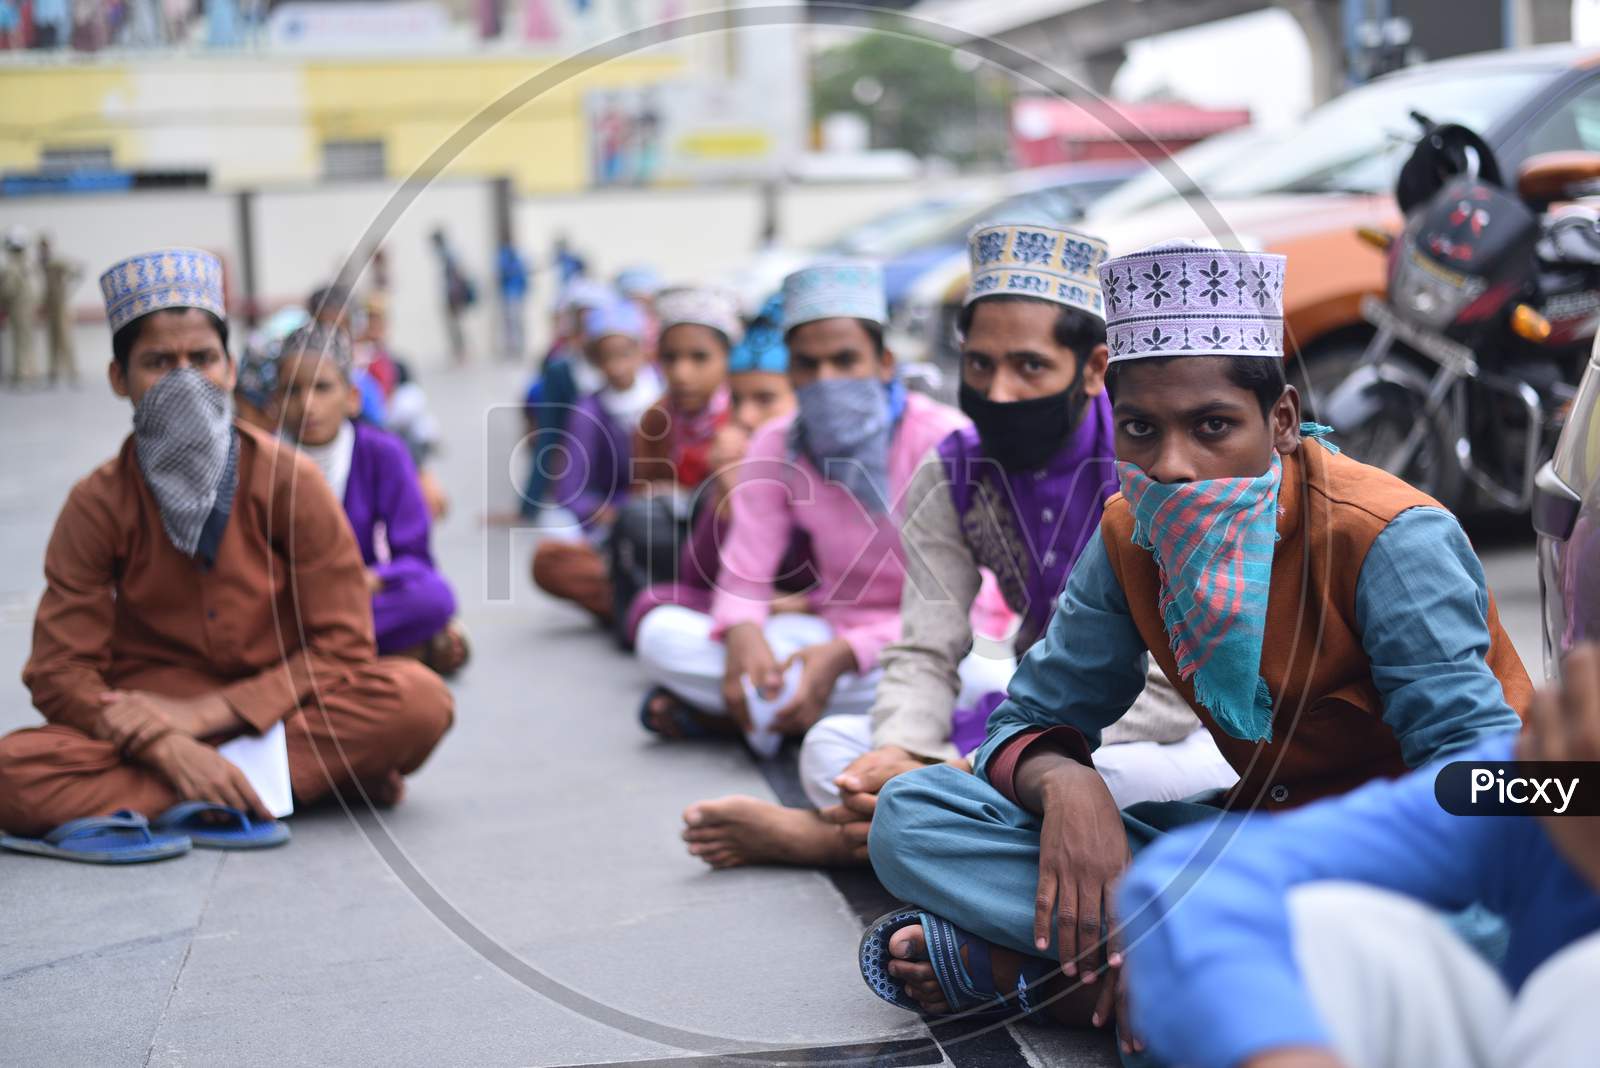 Migrant workers from Jharkhand, Bihar and Uttar Pradesh wait for their turn to register for the Shramik Special Train to reach their hometowns. Hyderabad, Telangana, May 19,2020